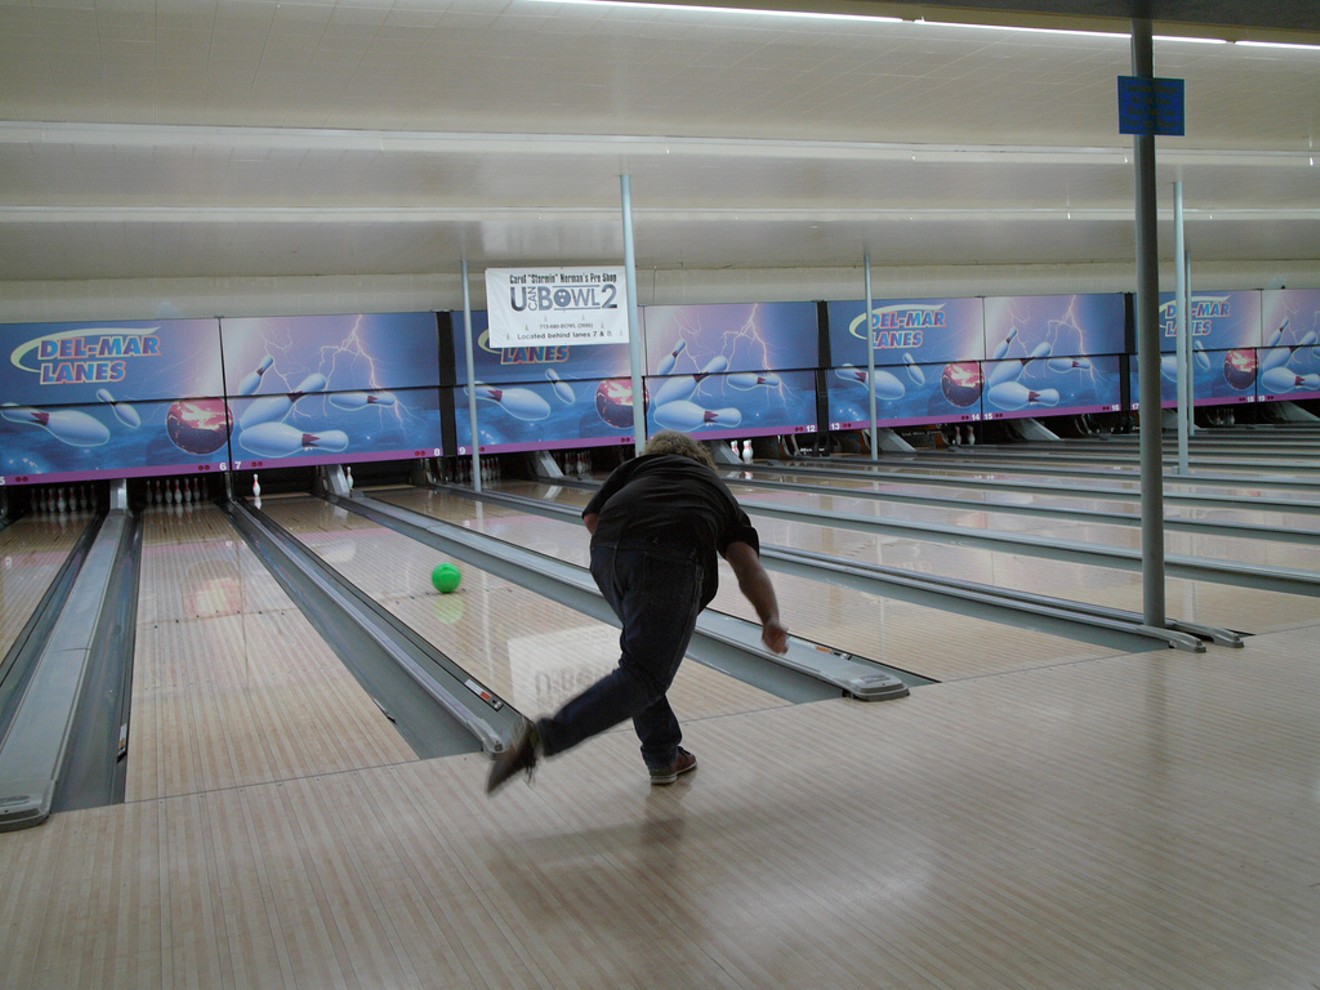 Knock down some pins while knocking down a few cold ones at Del Mar Lanes.